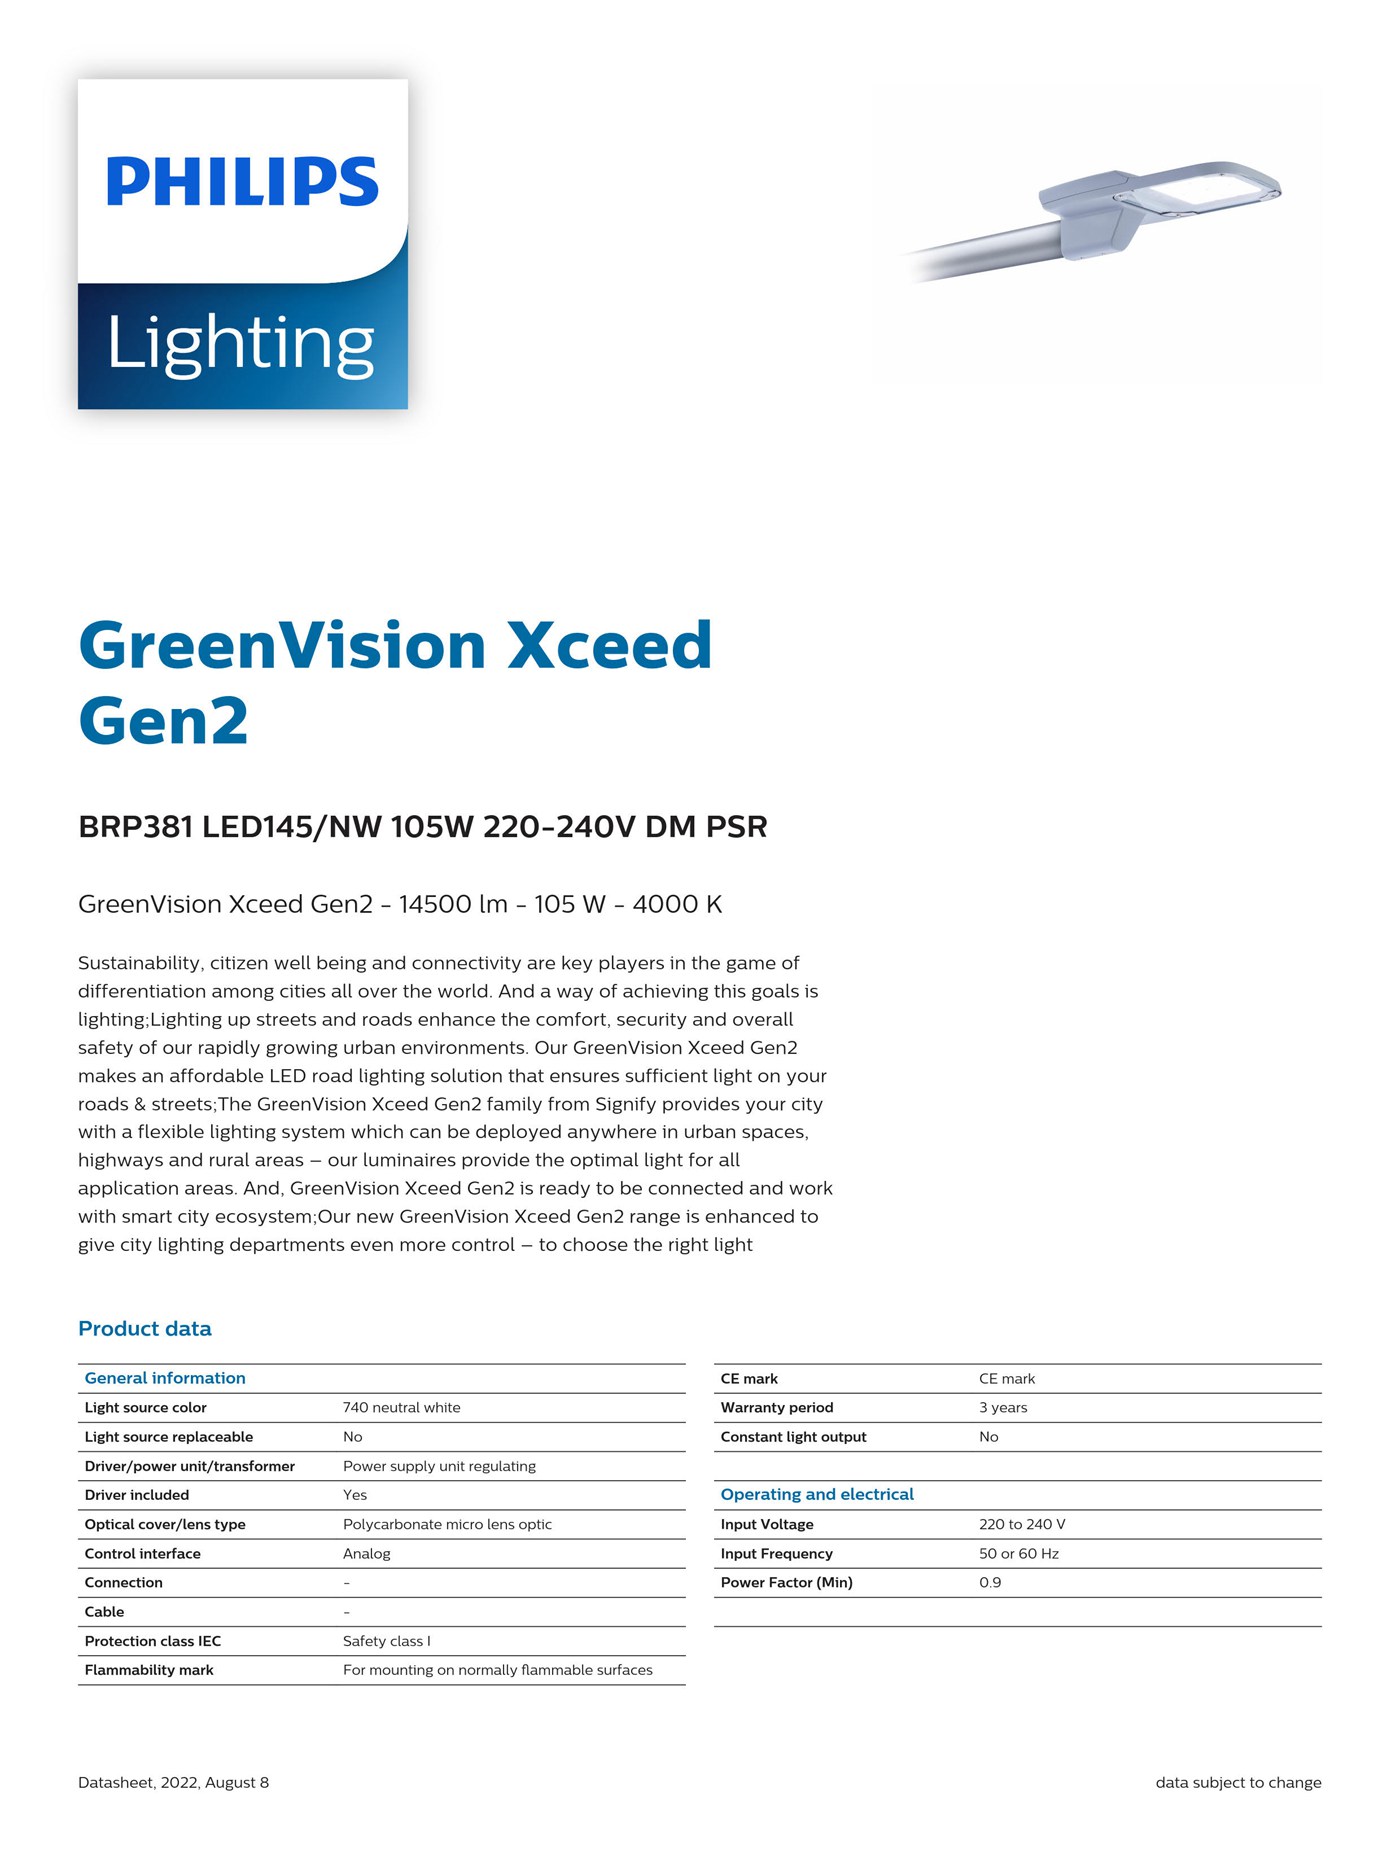 PHILIPS GreenVision Xceed Gen2 BRP381 LED145/NW 105W 220-240V DM PSR 911401875698